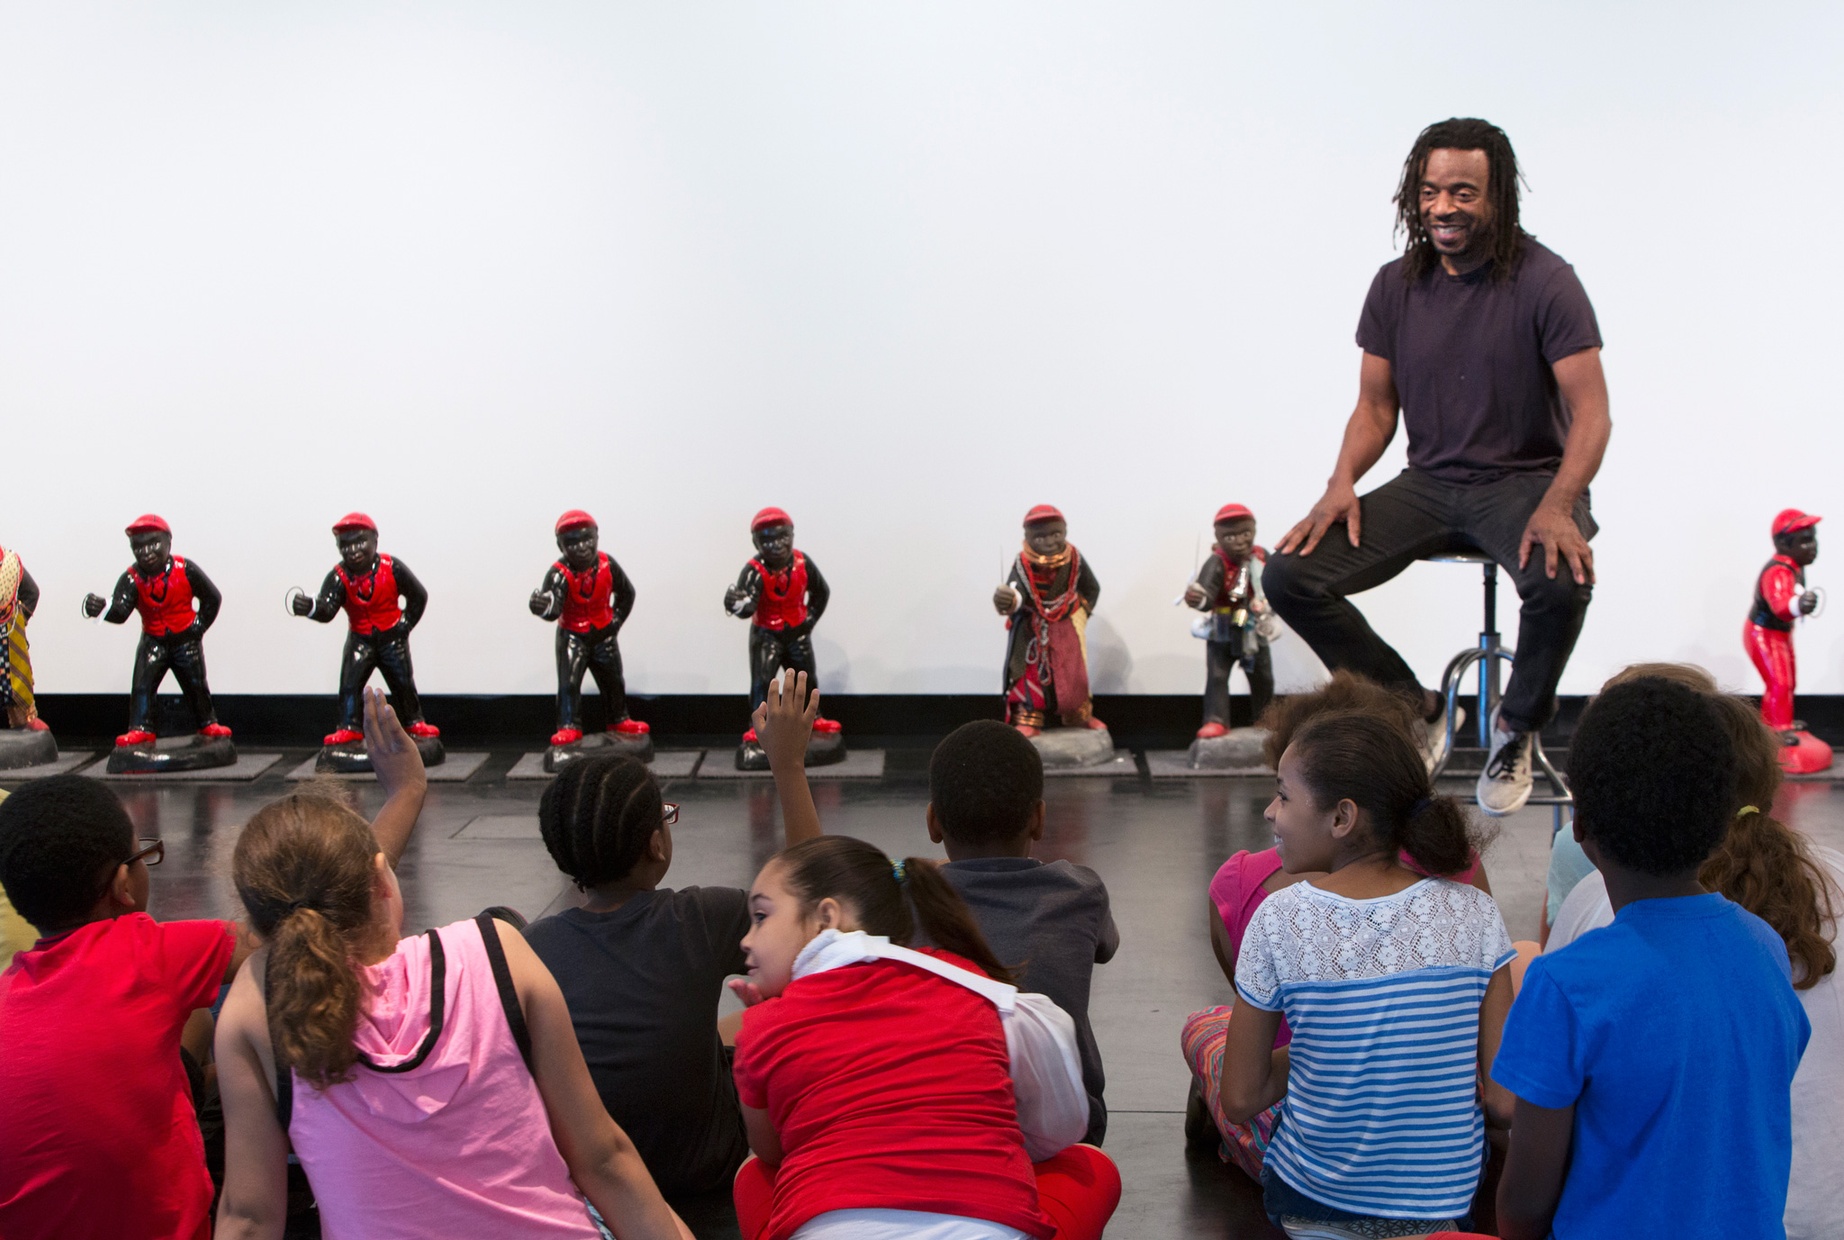 A man speaks with children before a series of sculptures.